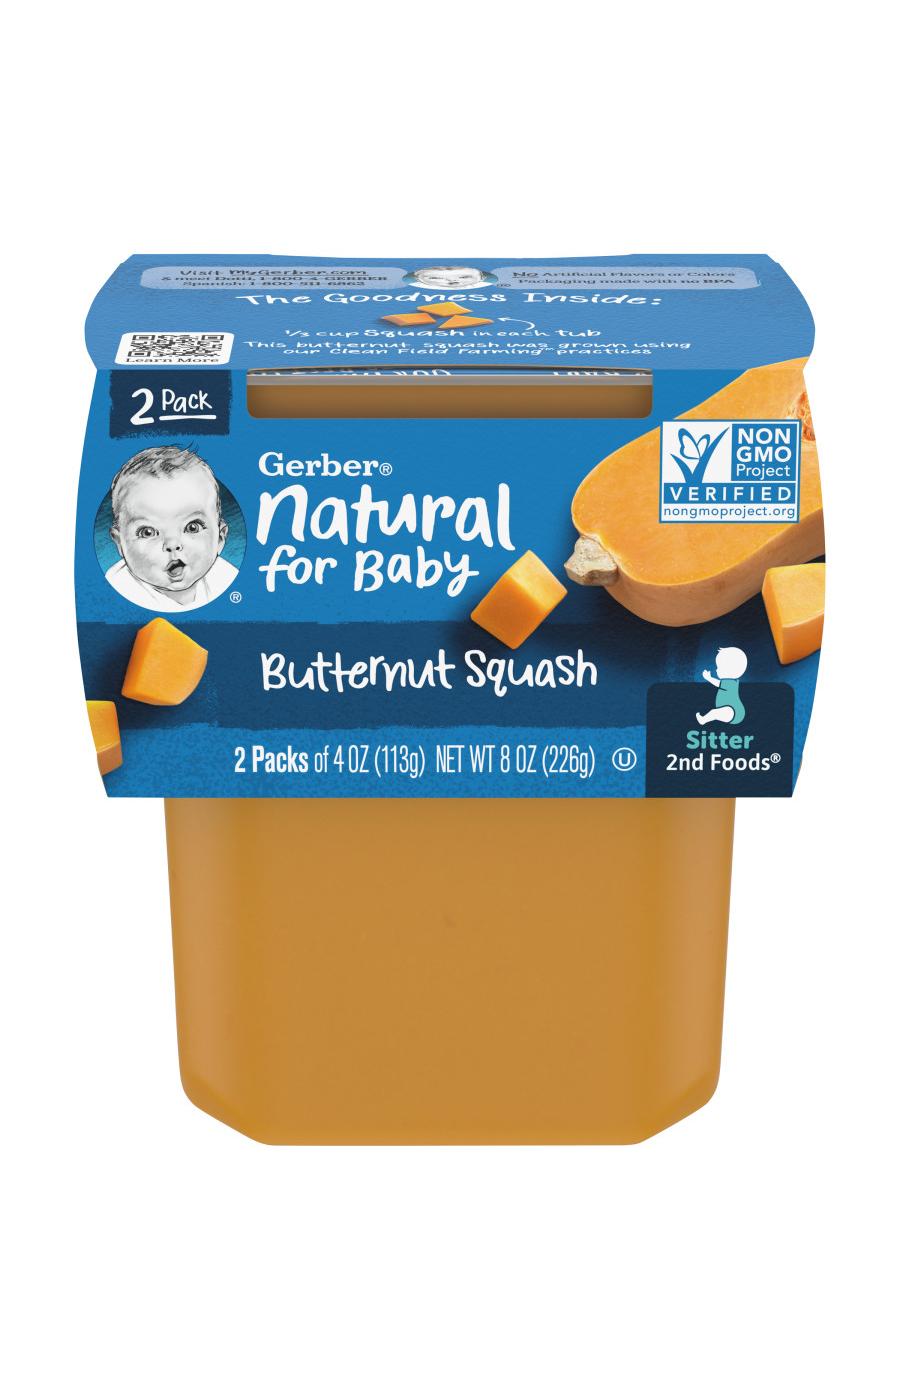 Gerber Natural for Baby 2nd Foods - Butternut Squash; image 1 of 8